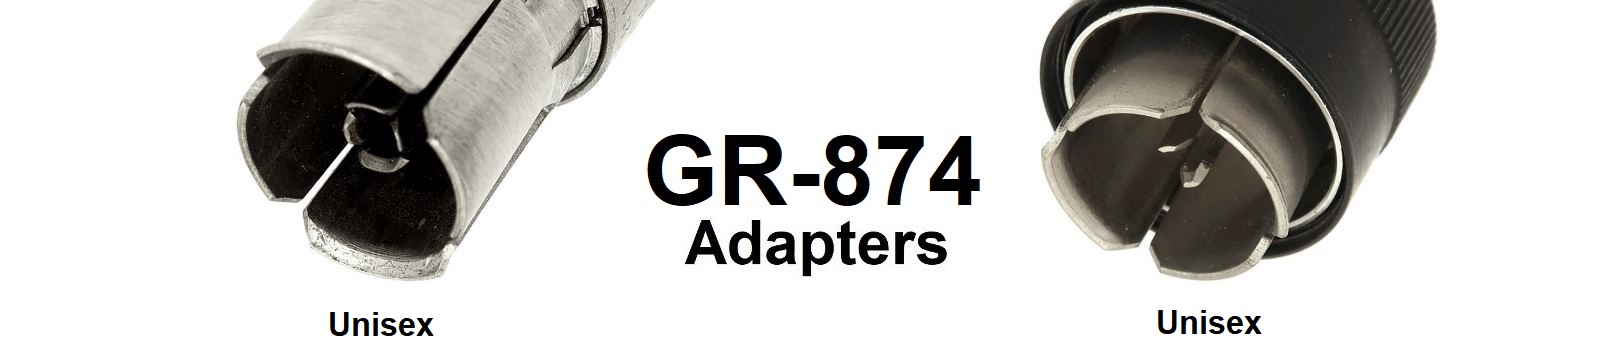 GR-874 Adapters Category Banner - Max-Gain Systems, Inc.